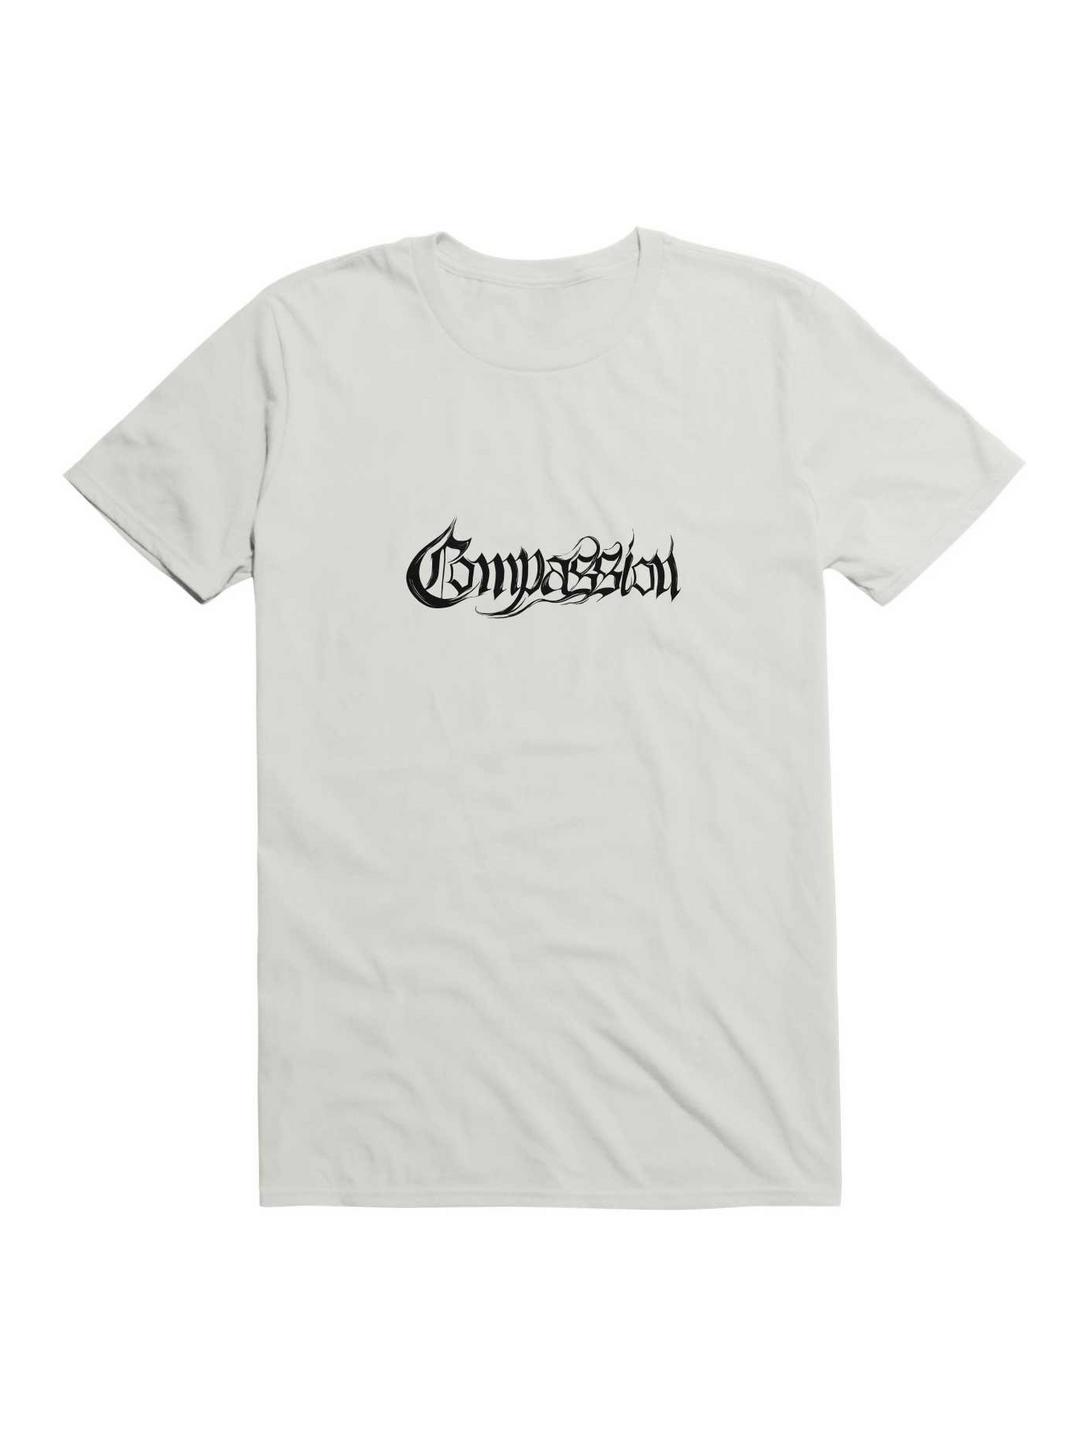 Black History Month Worst Creations Compassion T-Shirt, WHITE, hi-res